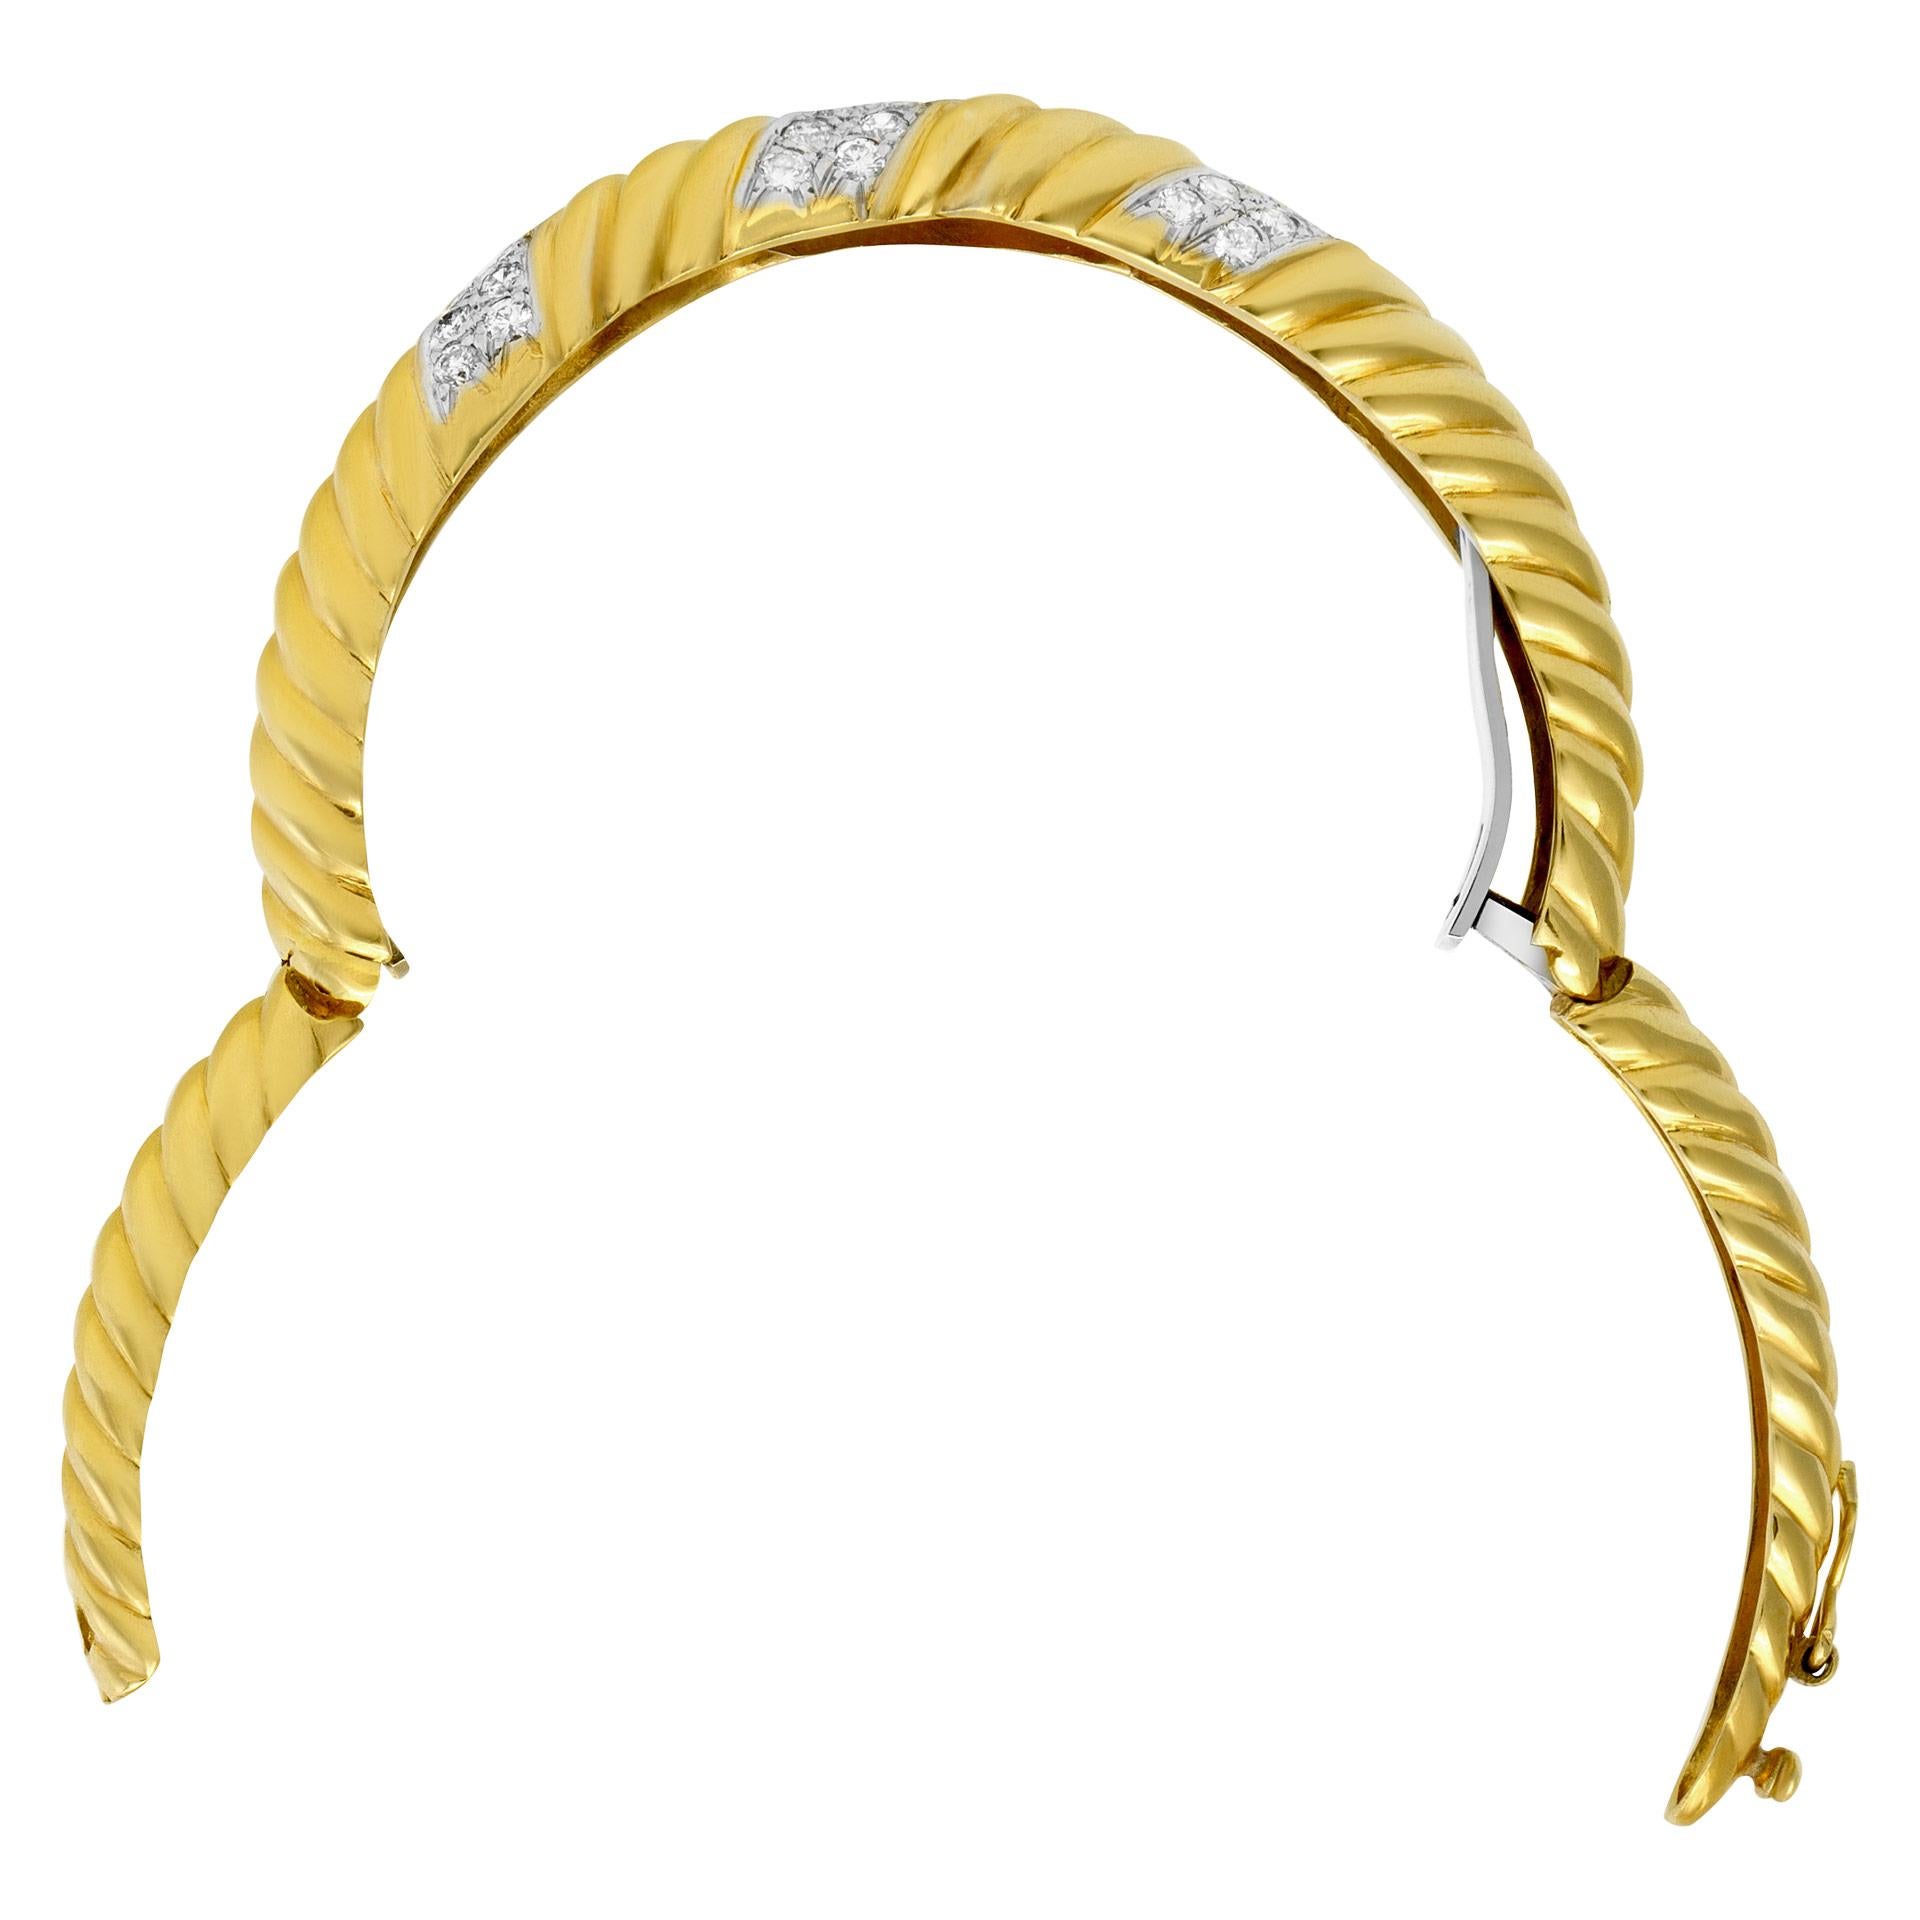 Diamond Bangle in 18k Yellow Gold In Excellent Condition For Sale In Surfside, FL